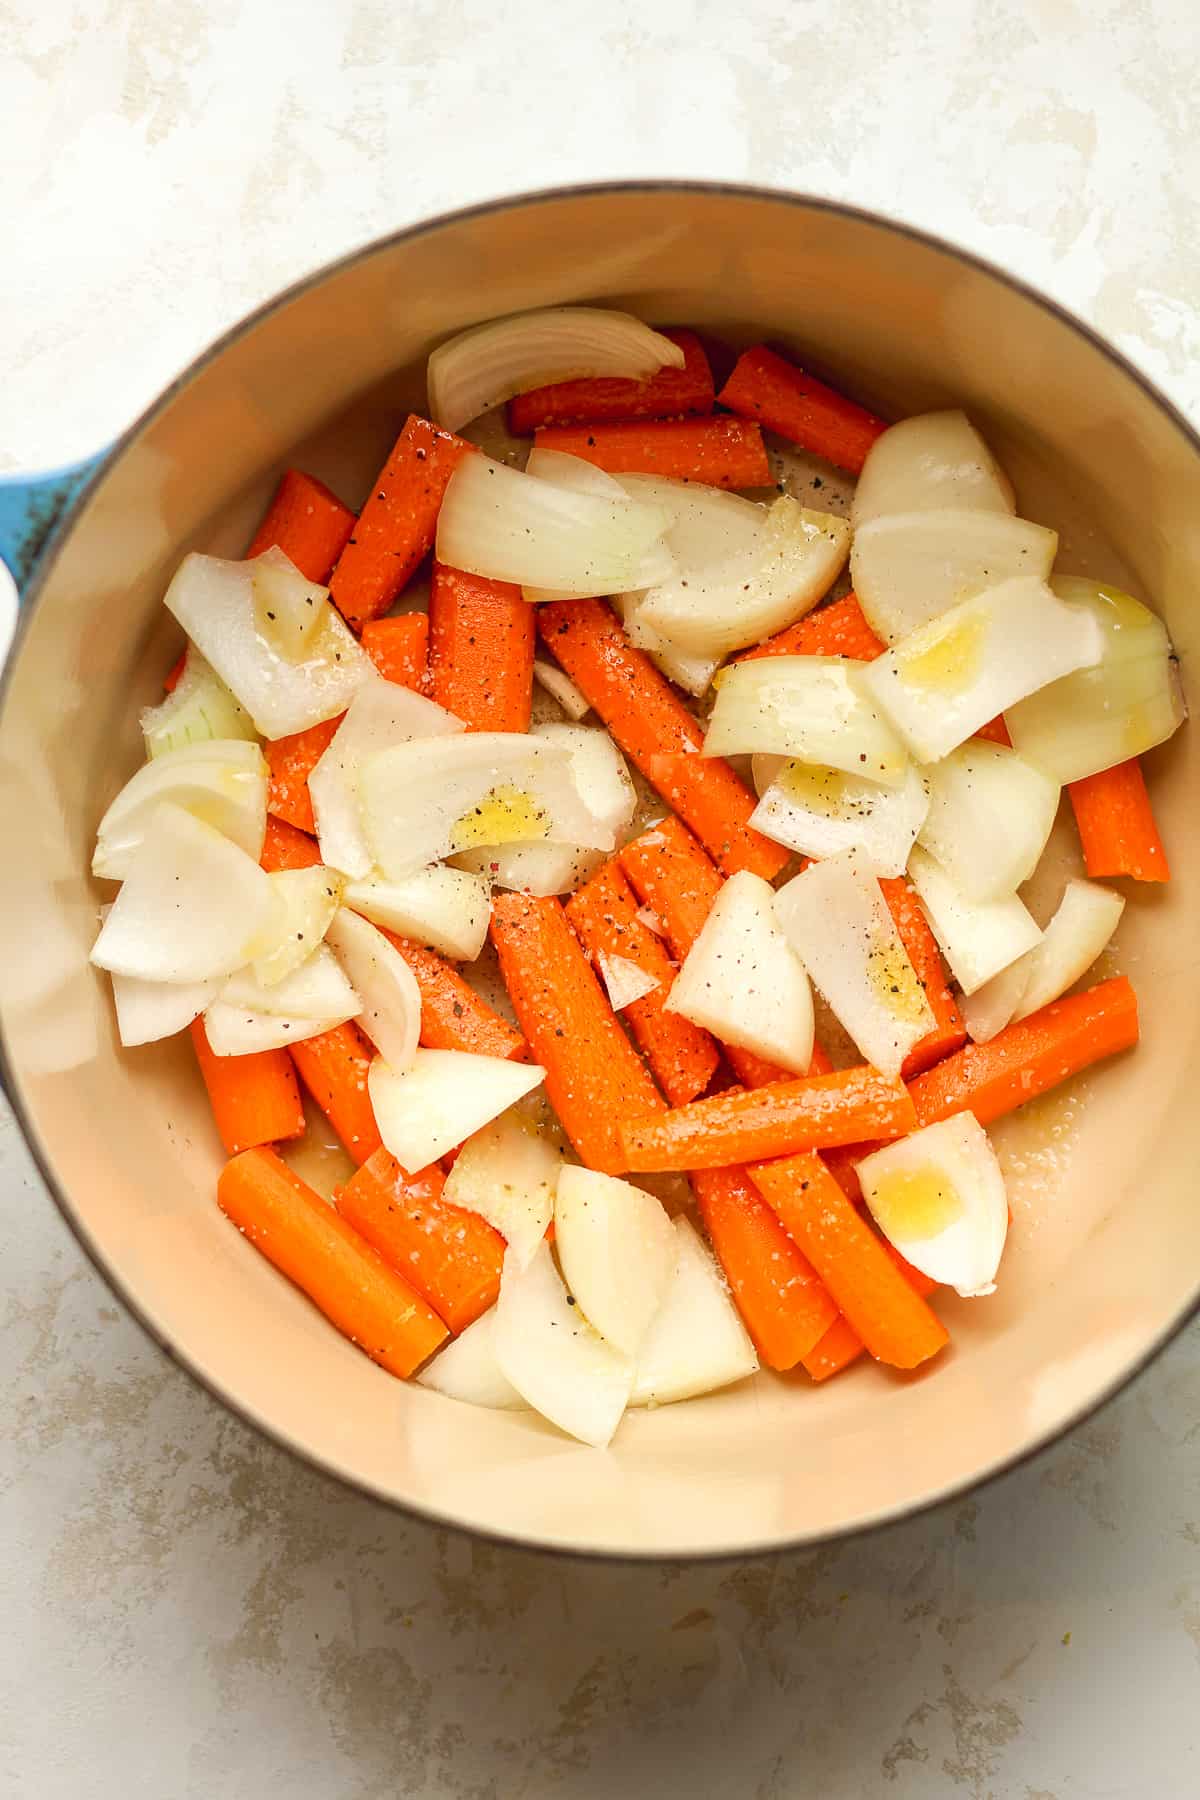 The carrots and onions in the pot.